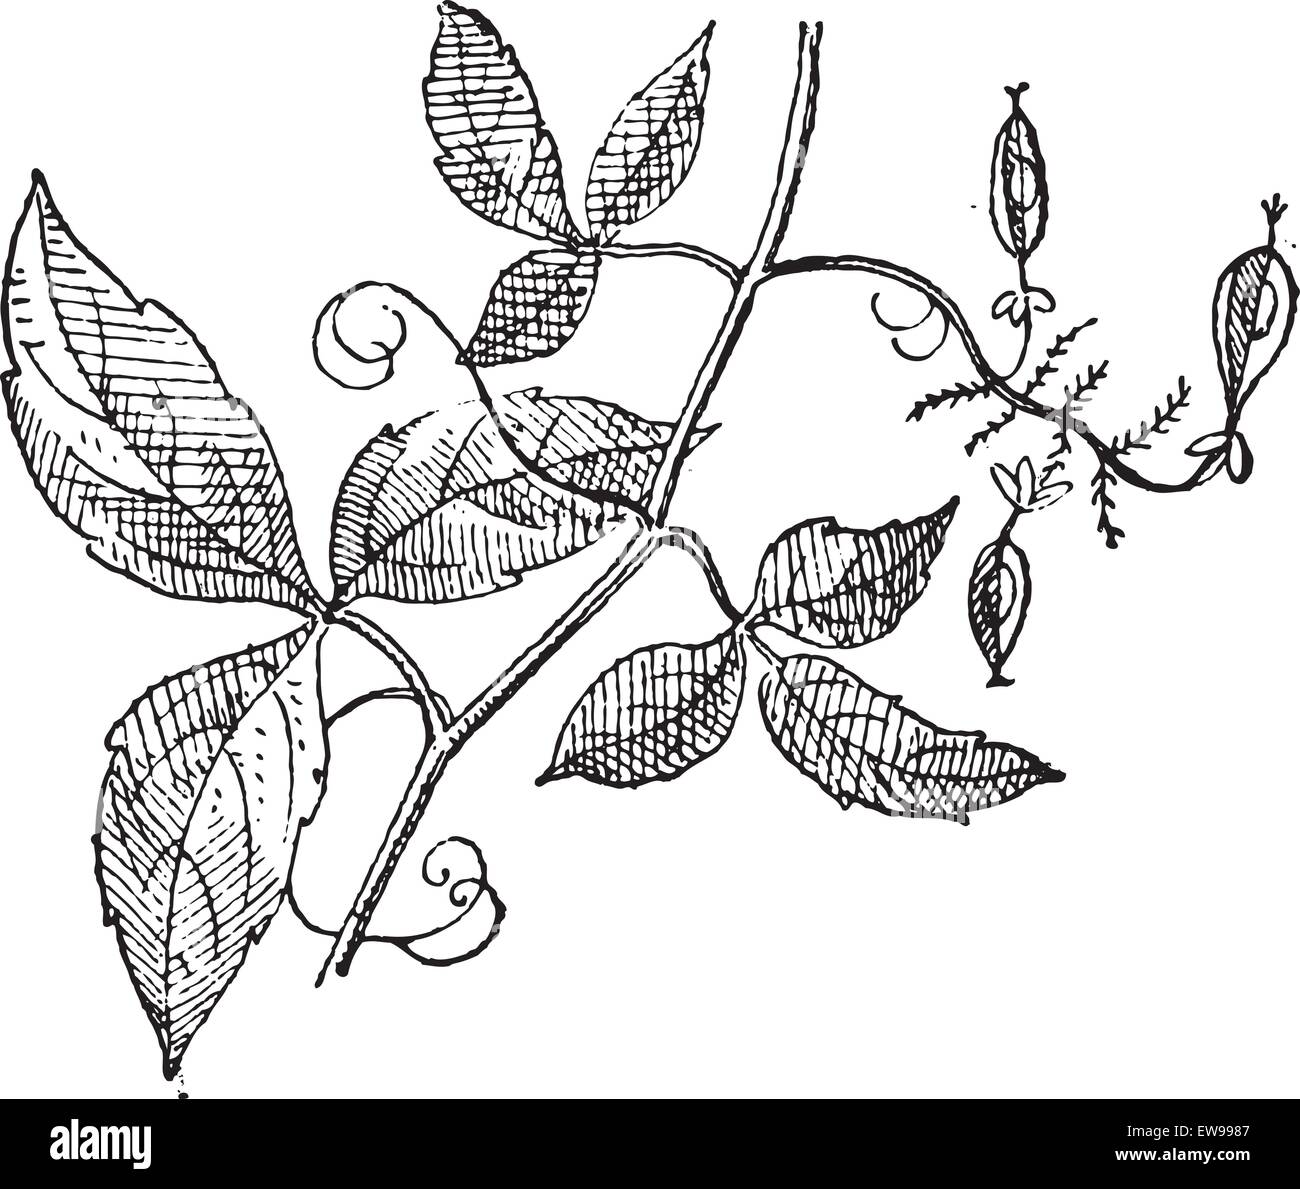 Urvillea or Urvillea sp., vintage engraved illustration. Dictionary of Words and Things - Larive and Fleury - 1895 Stock Vector